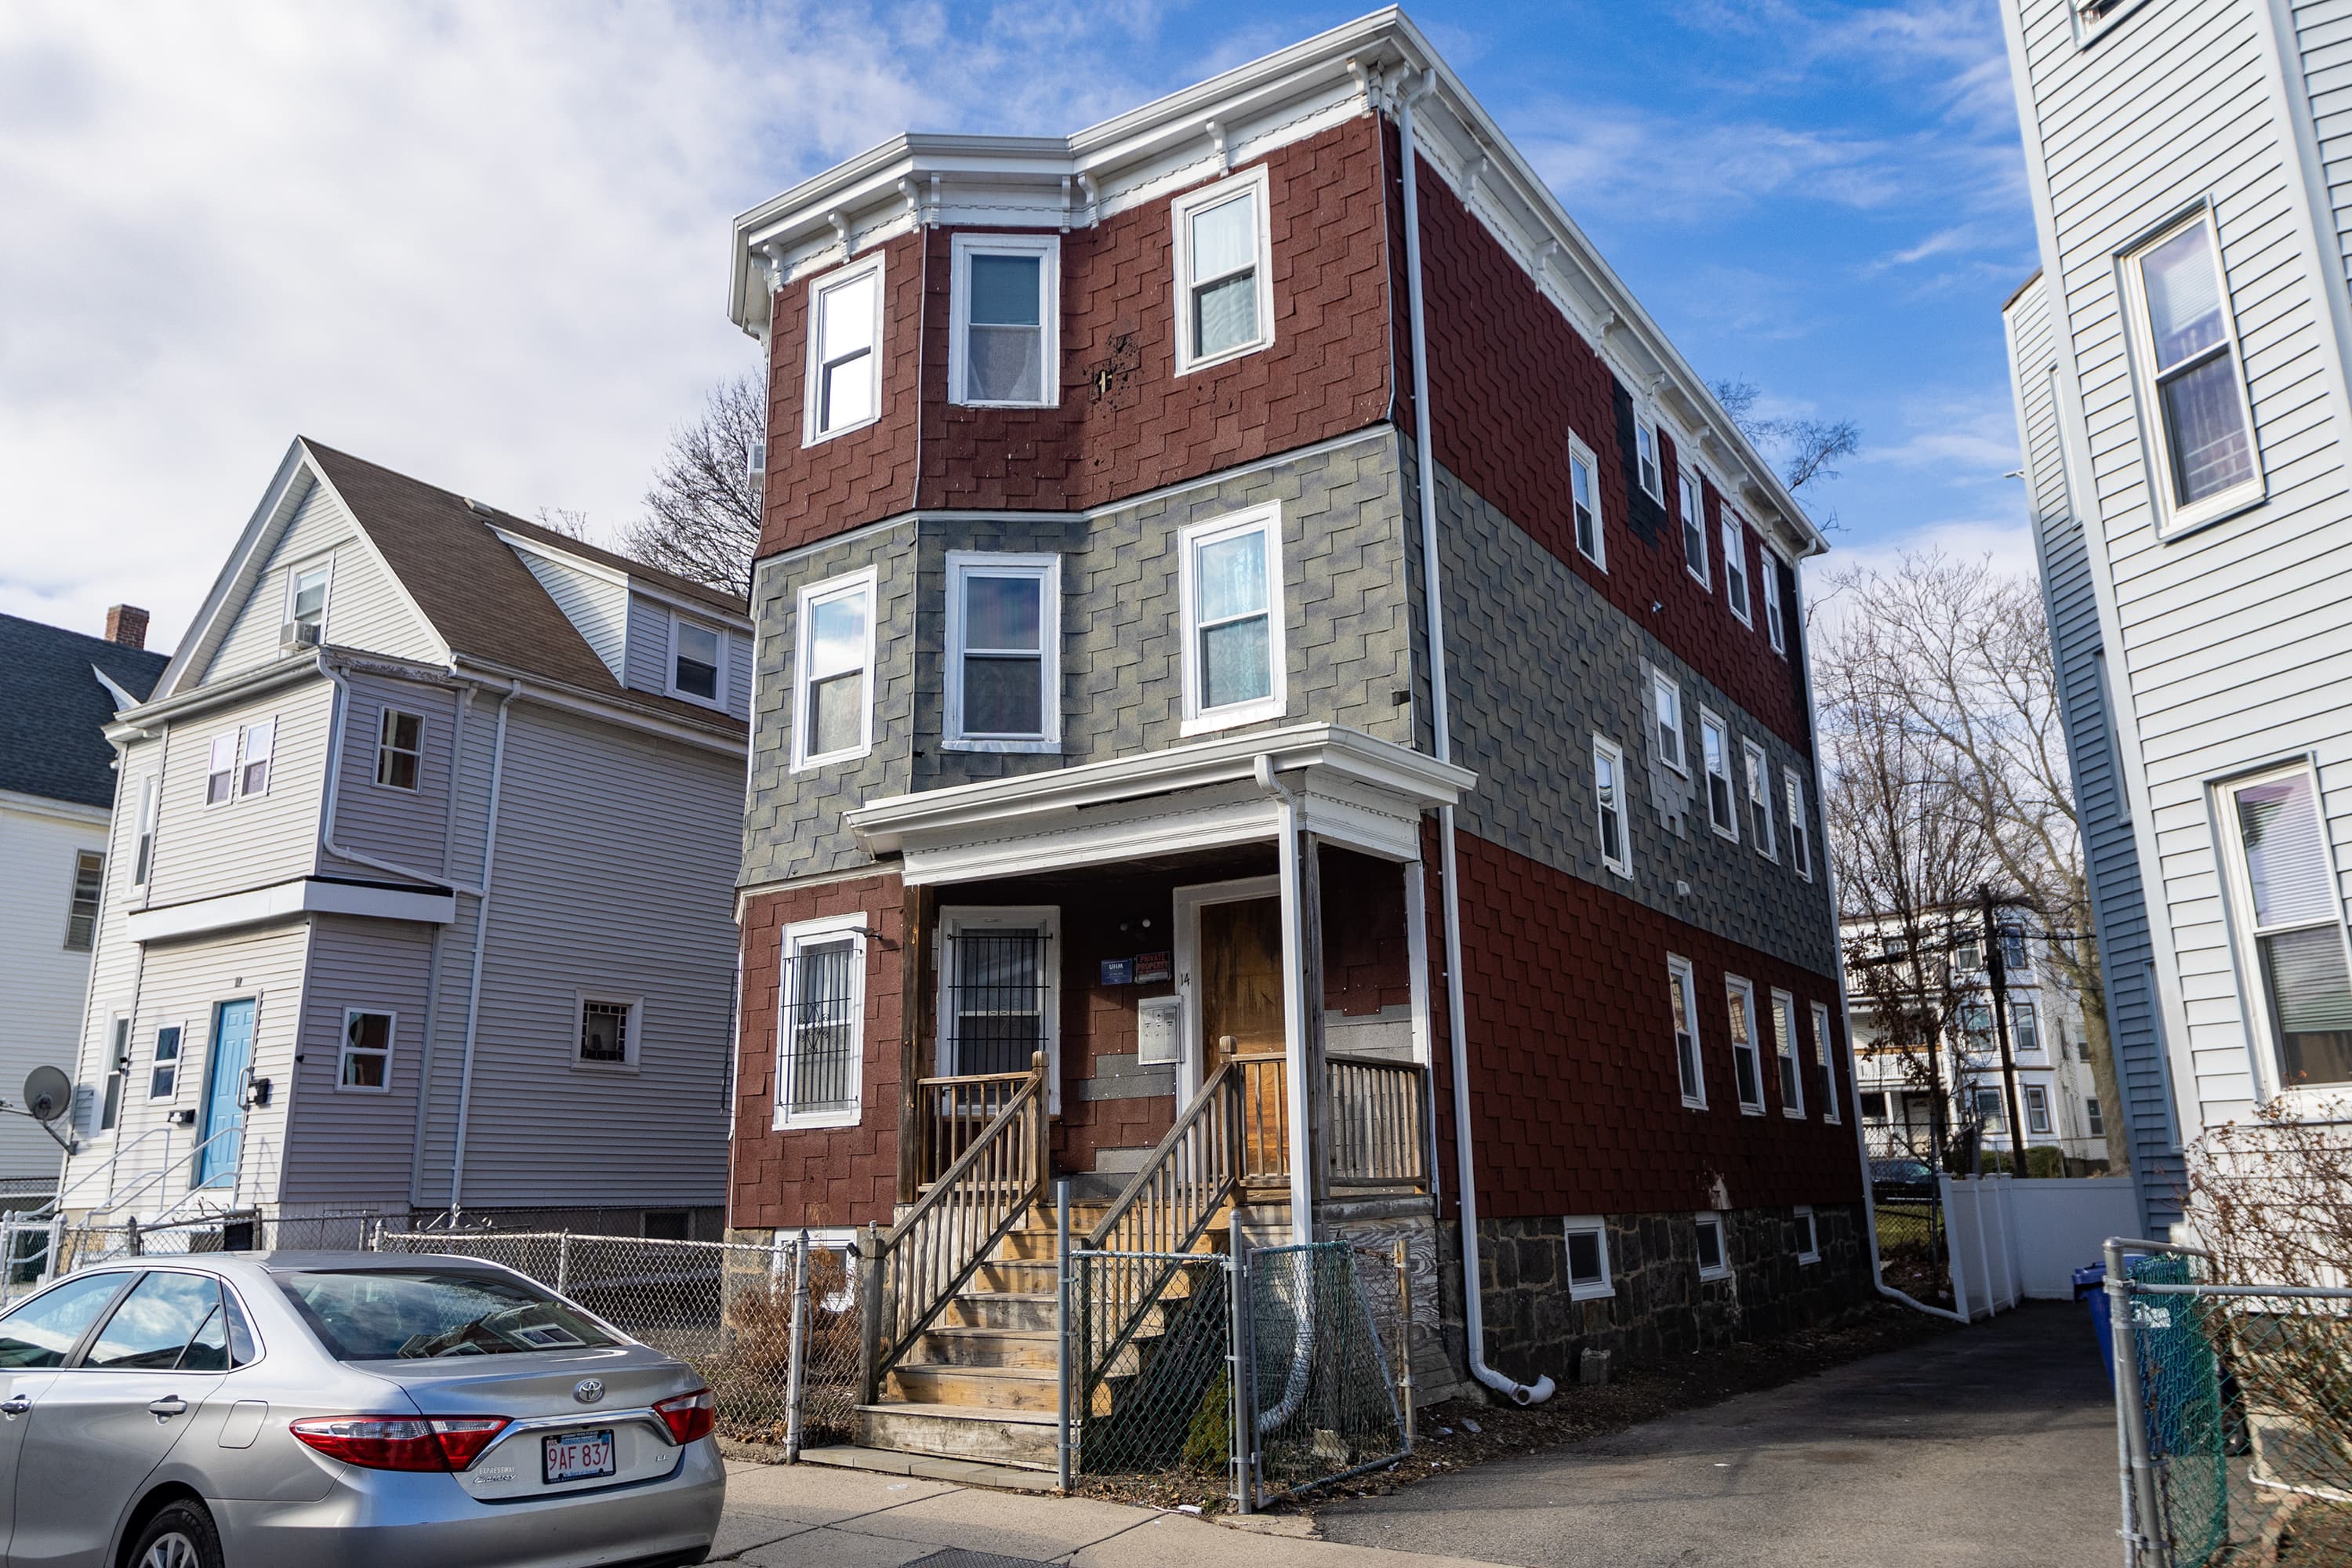 The property at 14 Leroy St. in Dorchester was recently purchased by Boston Neighborhood Community Land Trust. (Jesse Costa/WBUR)